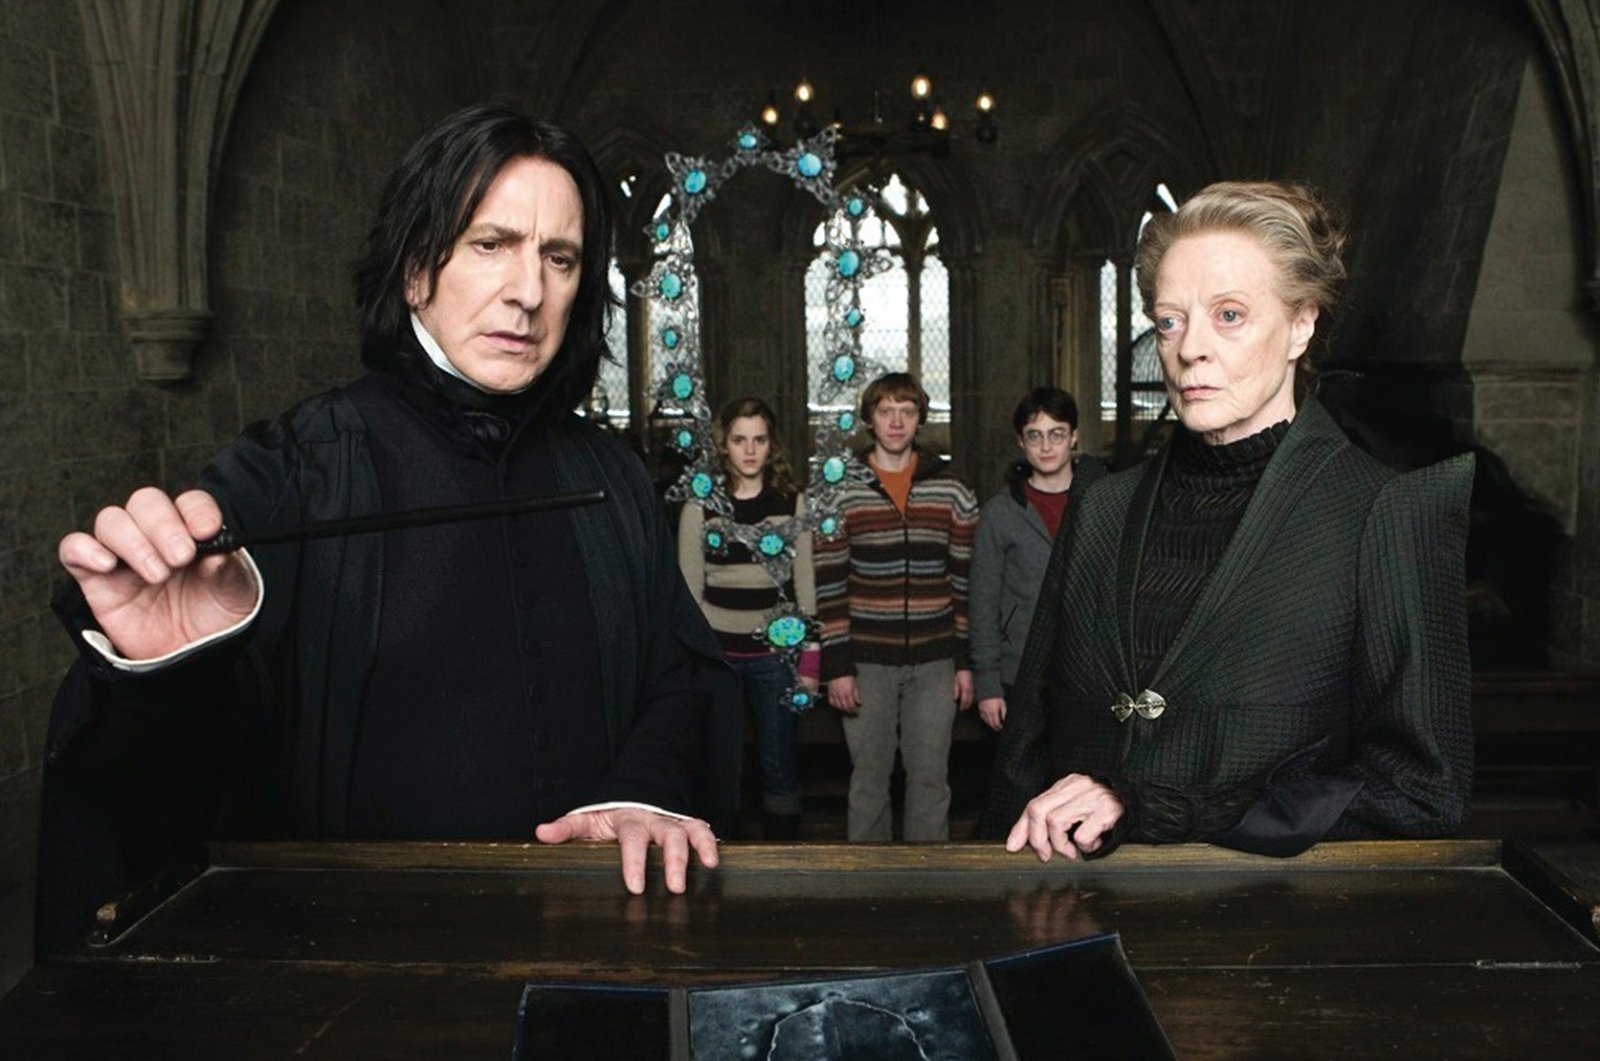 Alan Rickman, Maggie Smith, Rupert Grint, Daniel Radcliffe, and Emma Watson in Harry Potter and the Half-Blood Prince